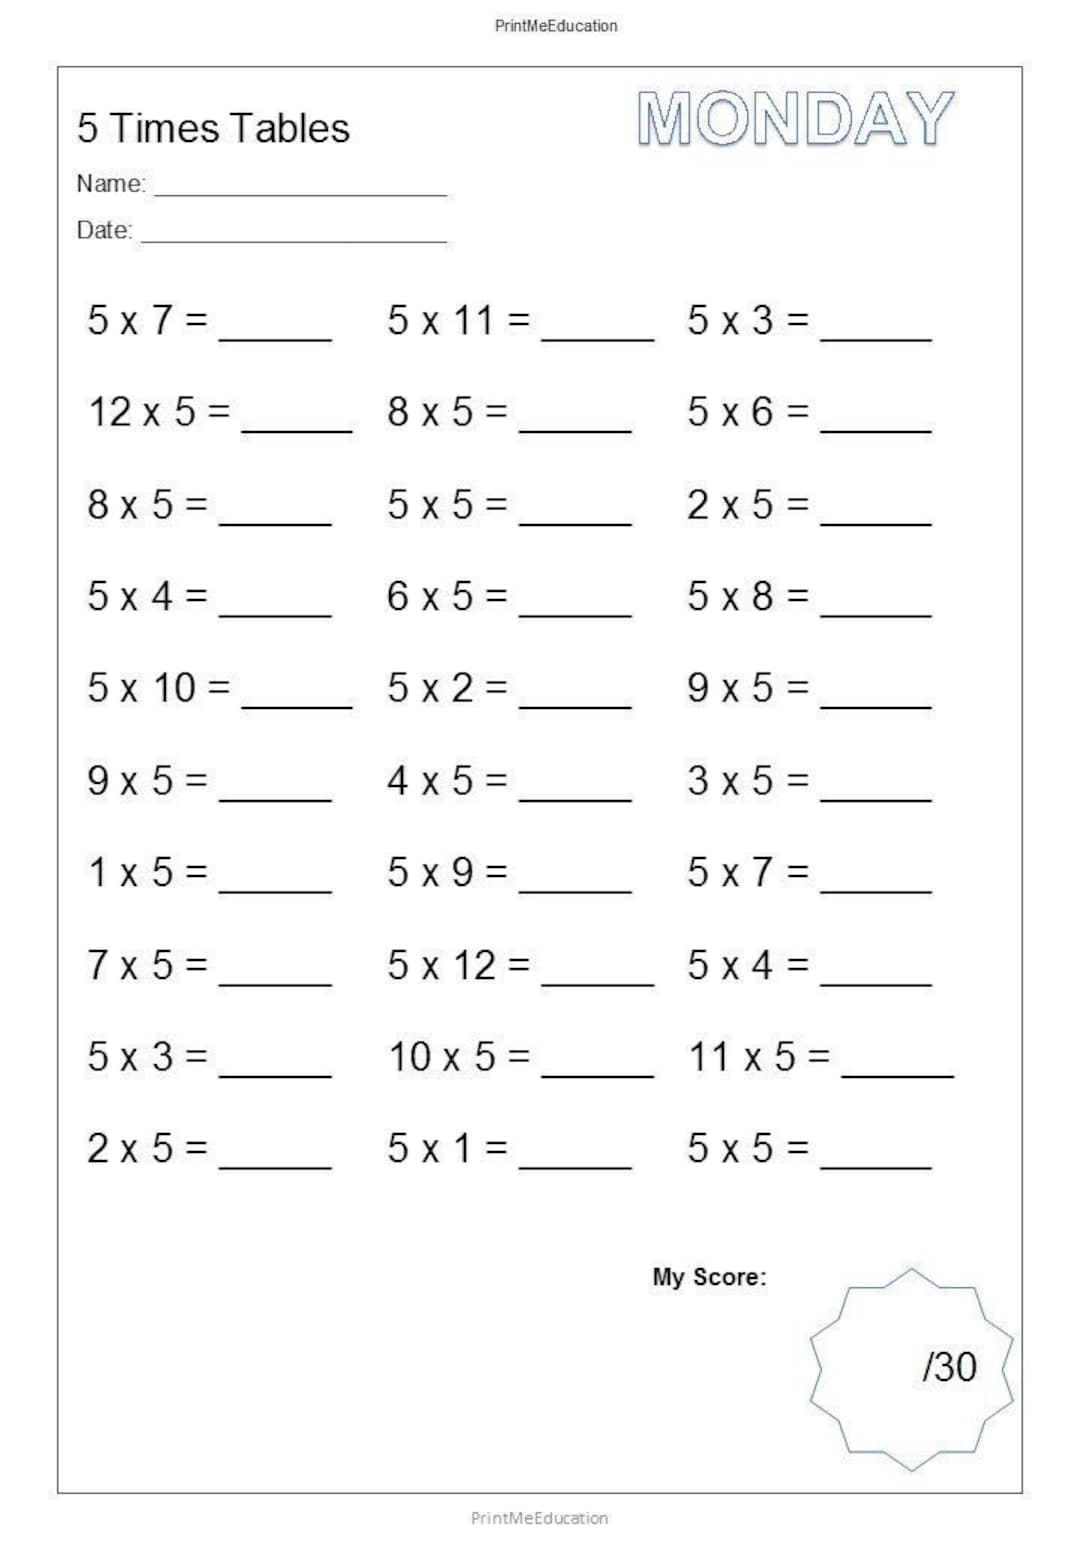 Times Tables Worksheets 2 to 12 18 One Page Worksheets Maths Test 